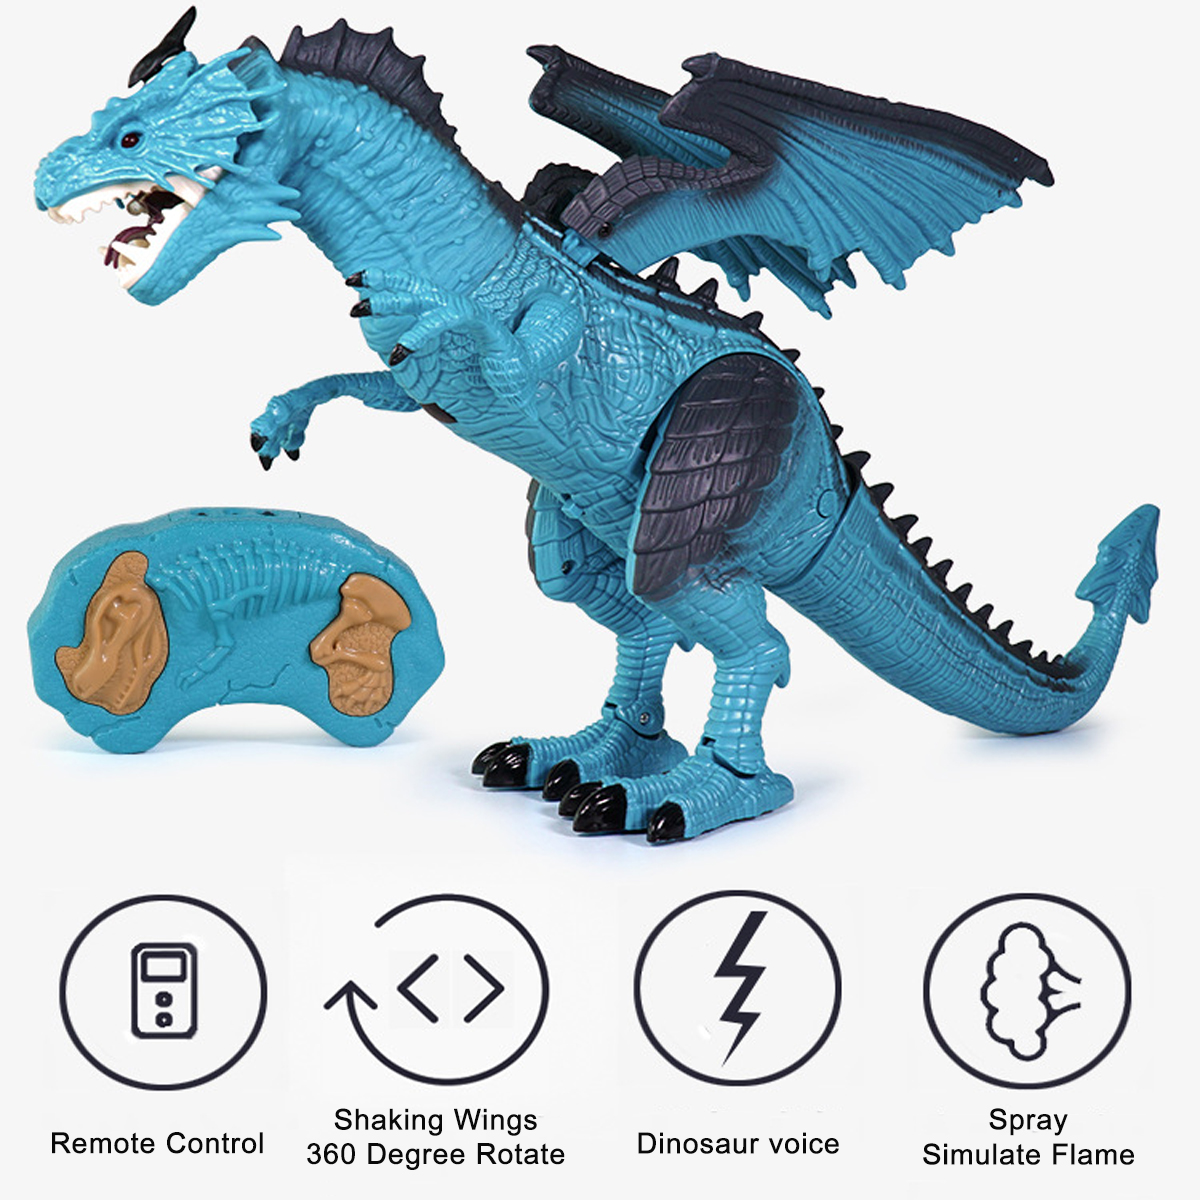 Remote-Control-360deg-Rotate-Spray-Dinosaur-with-Sound-LED-Light-and-Simulate-Flame-Diecast-Model-To-1773231-4